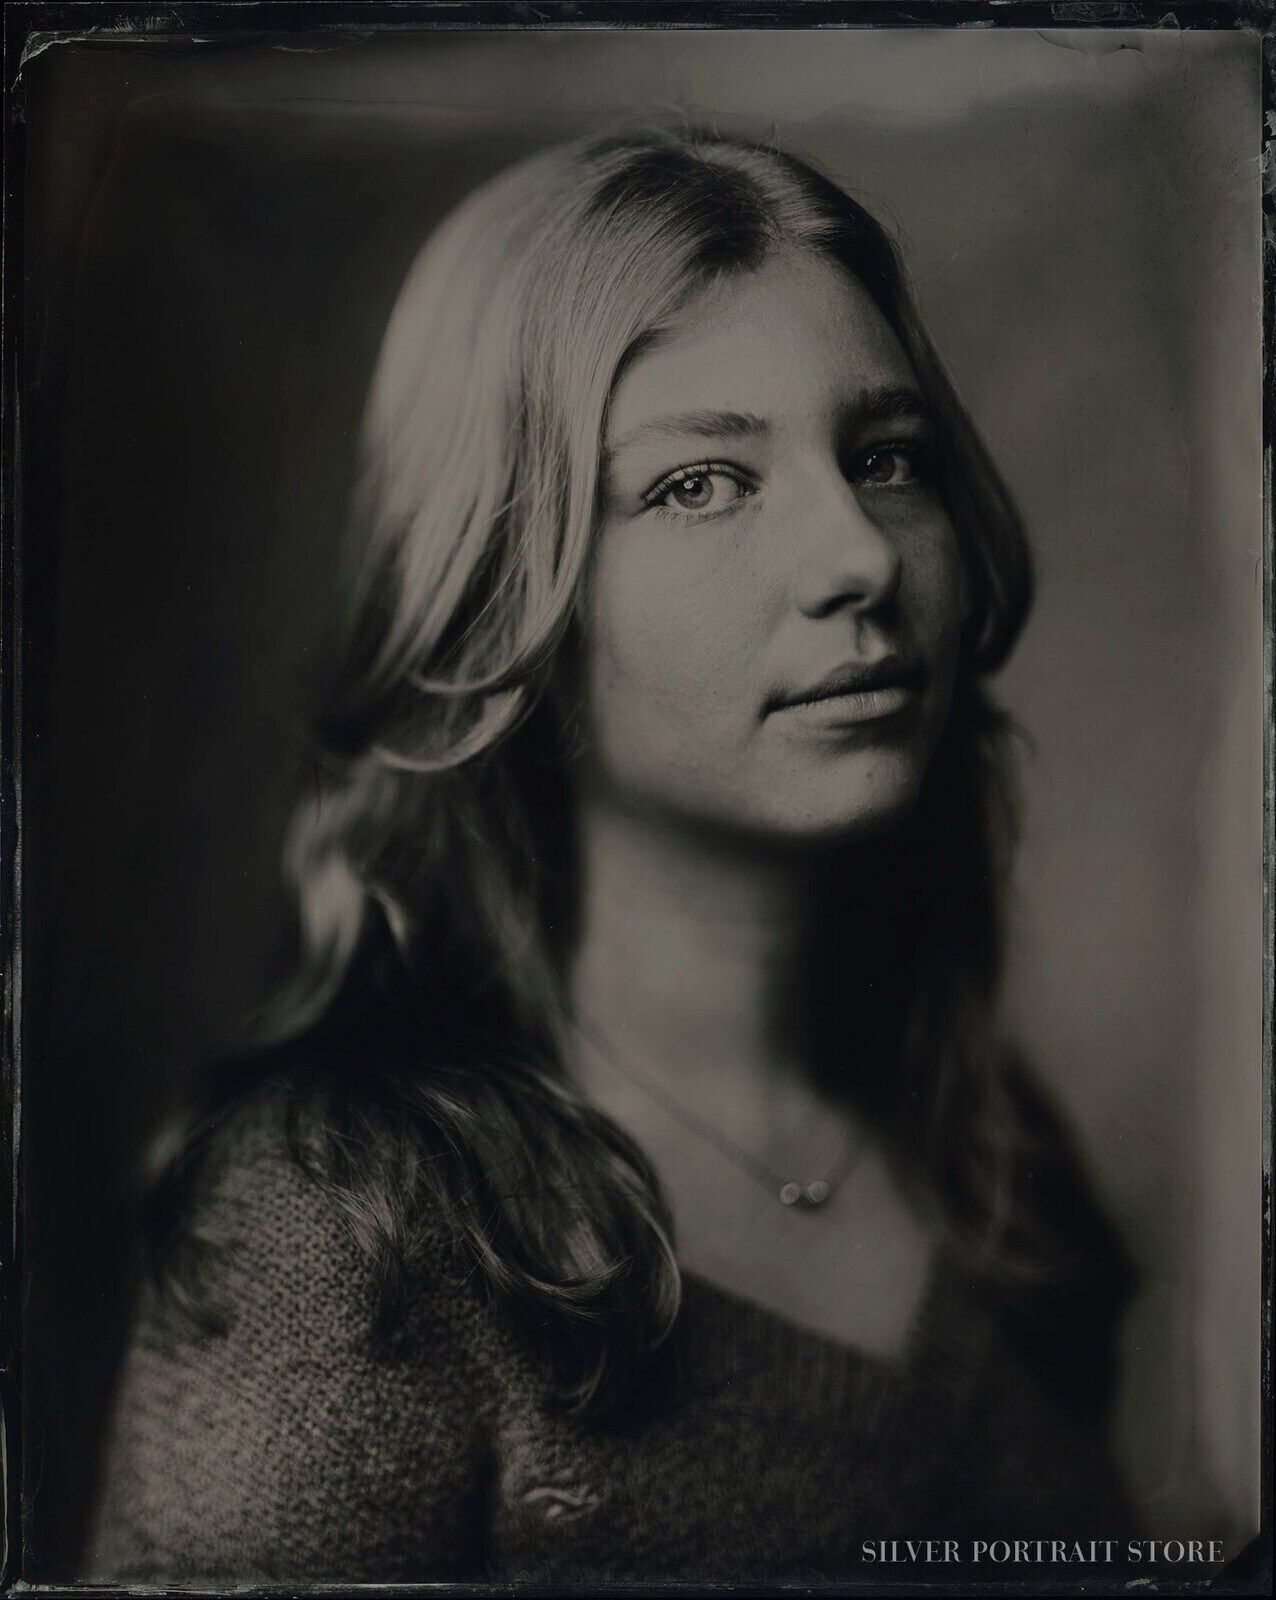 Charlotte-Silver Portrait Store-Wet plate collodion-Tintype 20 x 25 cm.